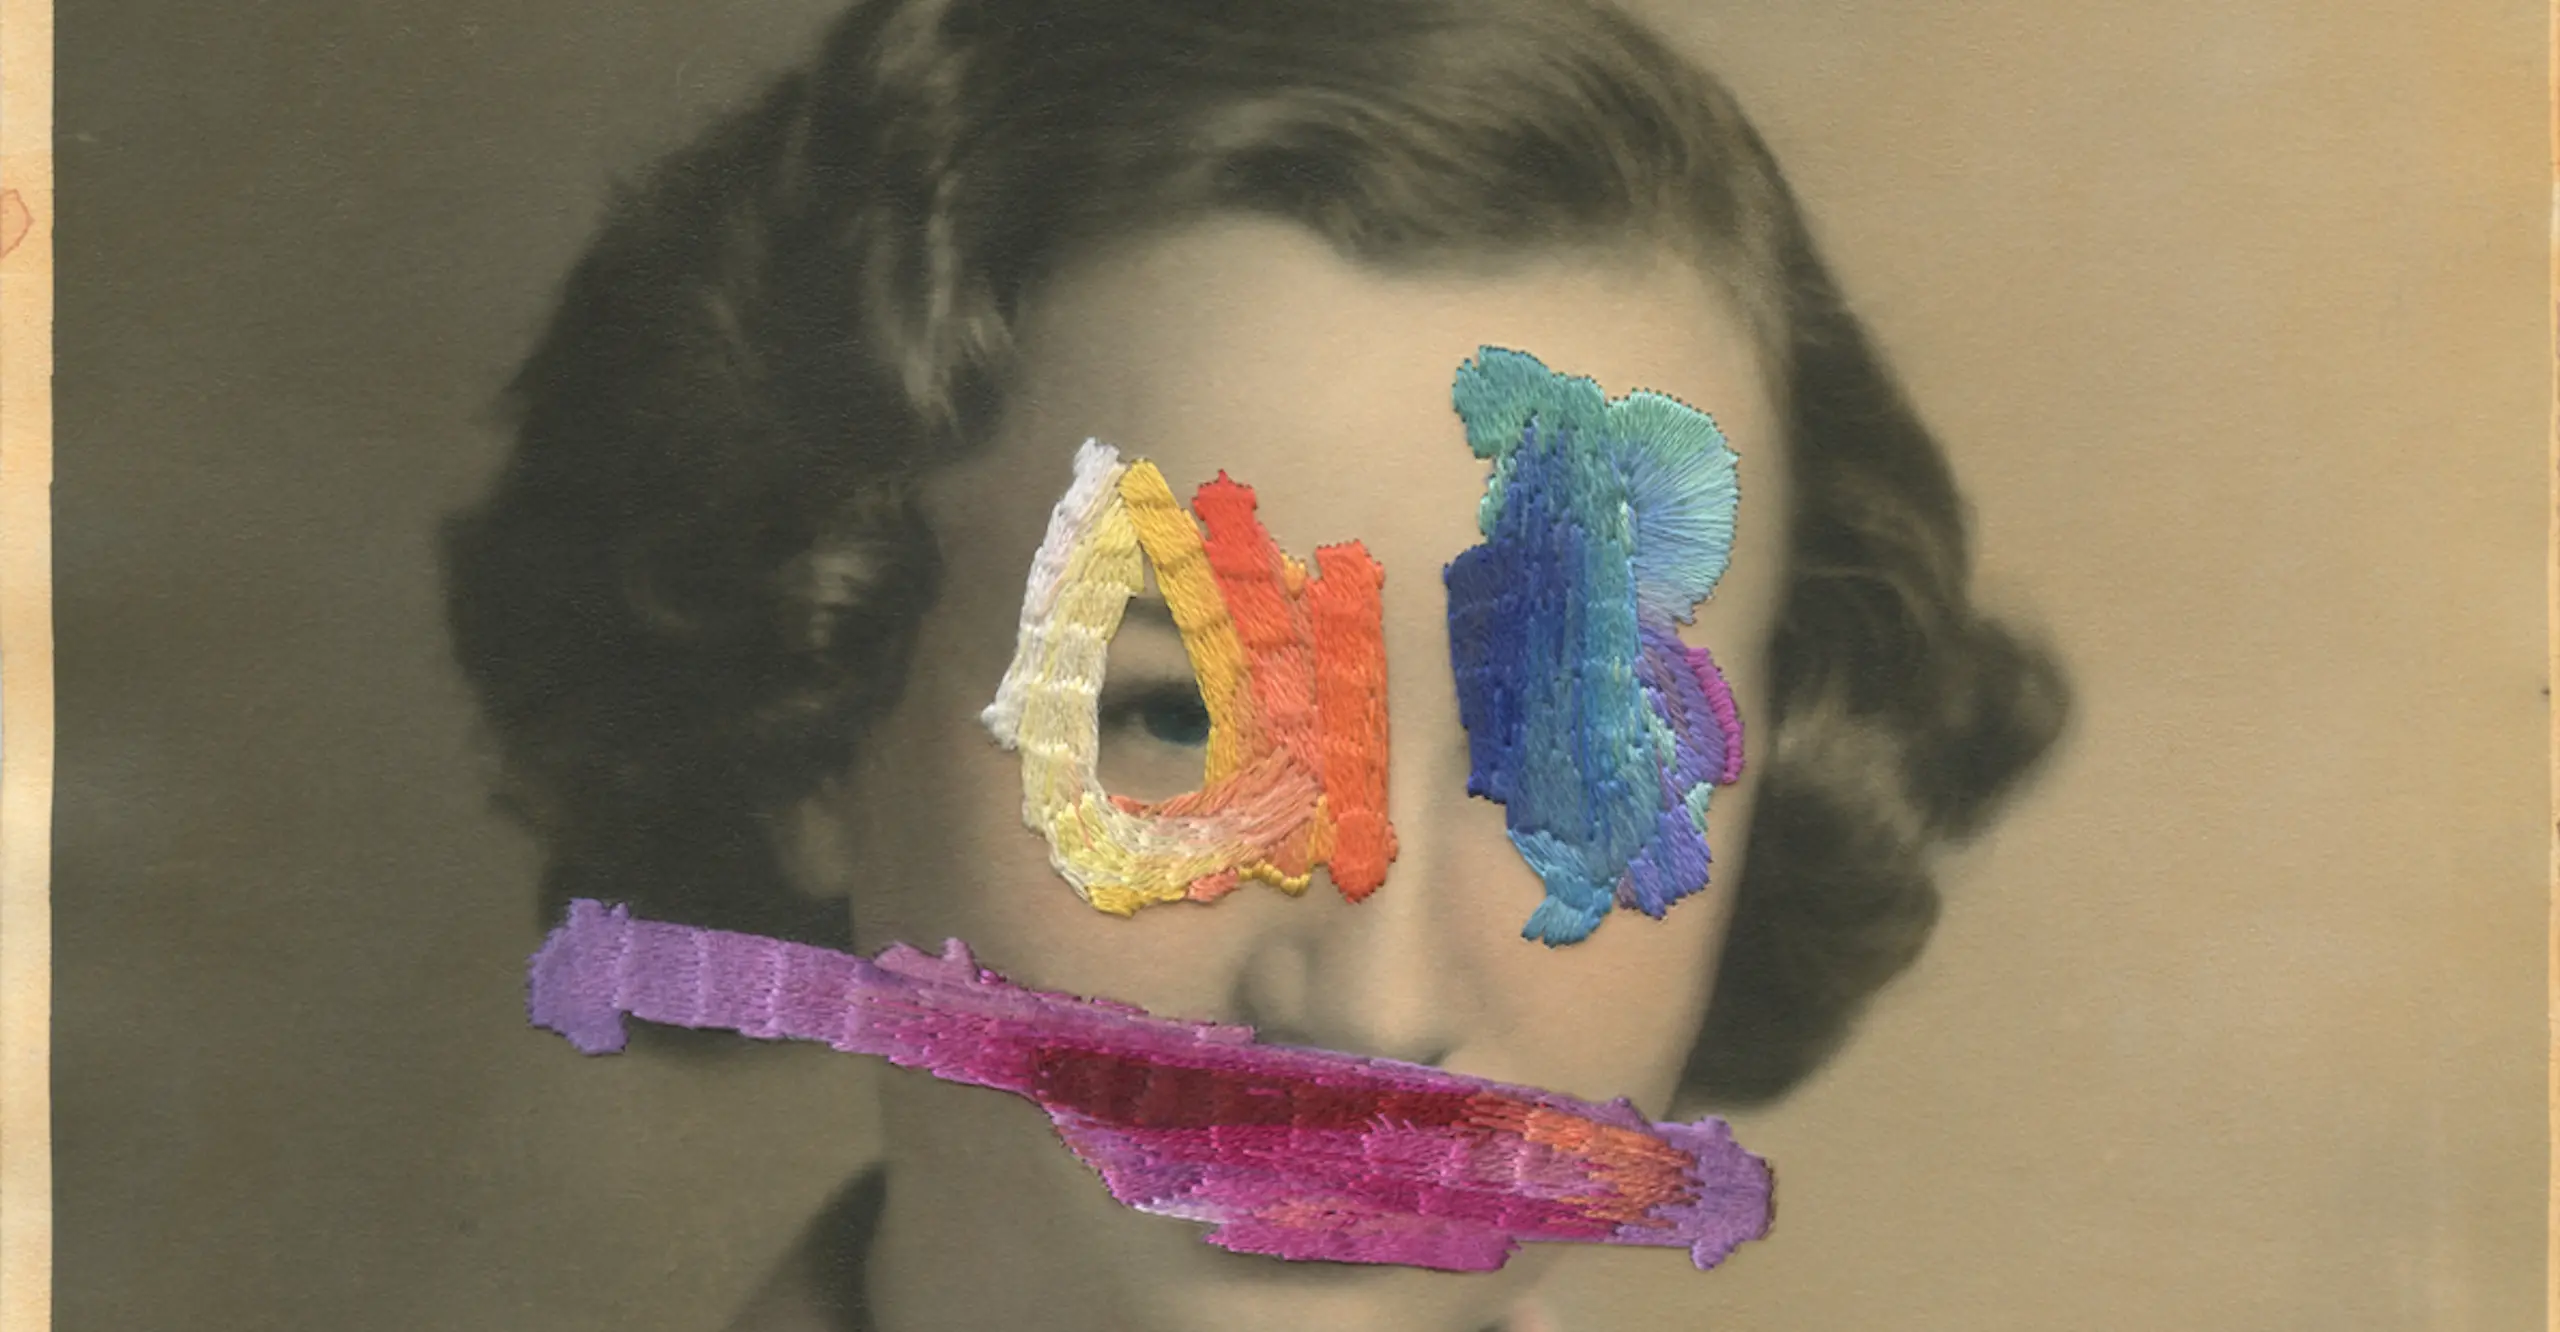 Vintage portrait of a woman with colourful threads sewn into the photograph, obscuring her features